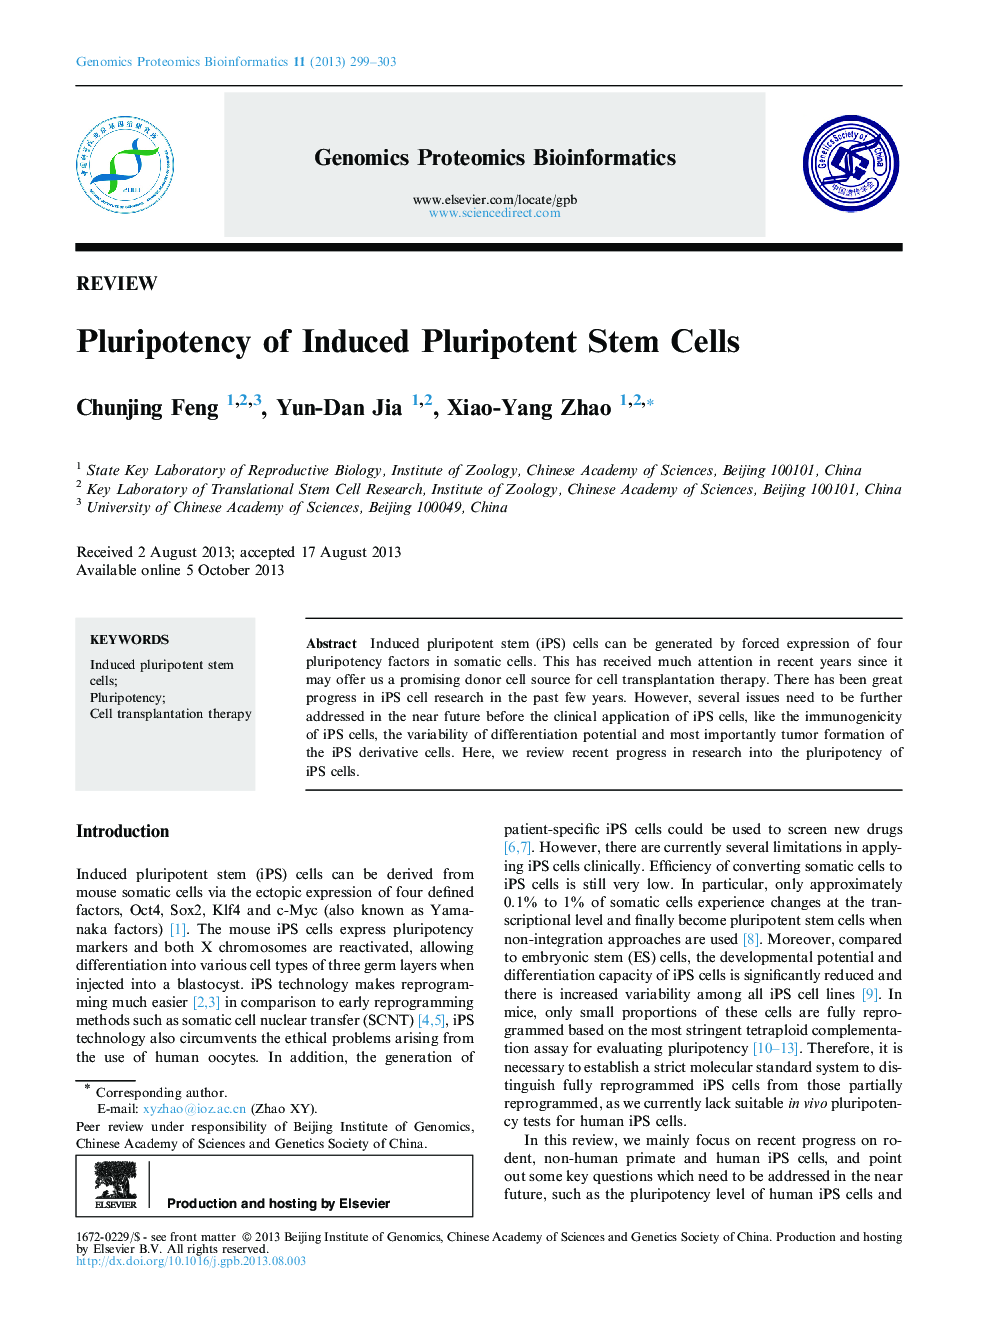 Pluripotency of Induced Pluripotent Stem Cells 